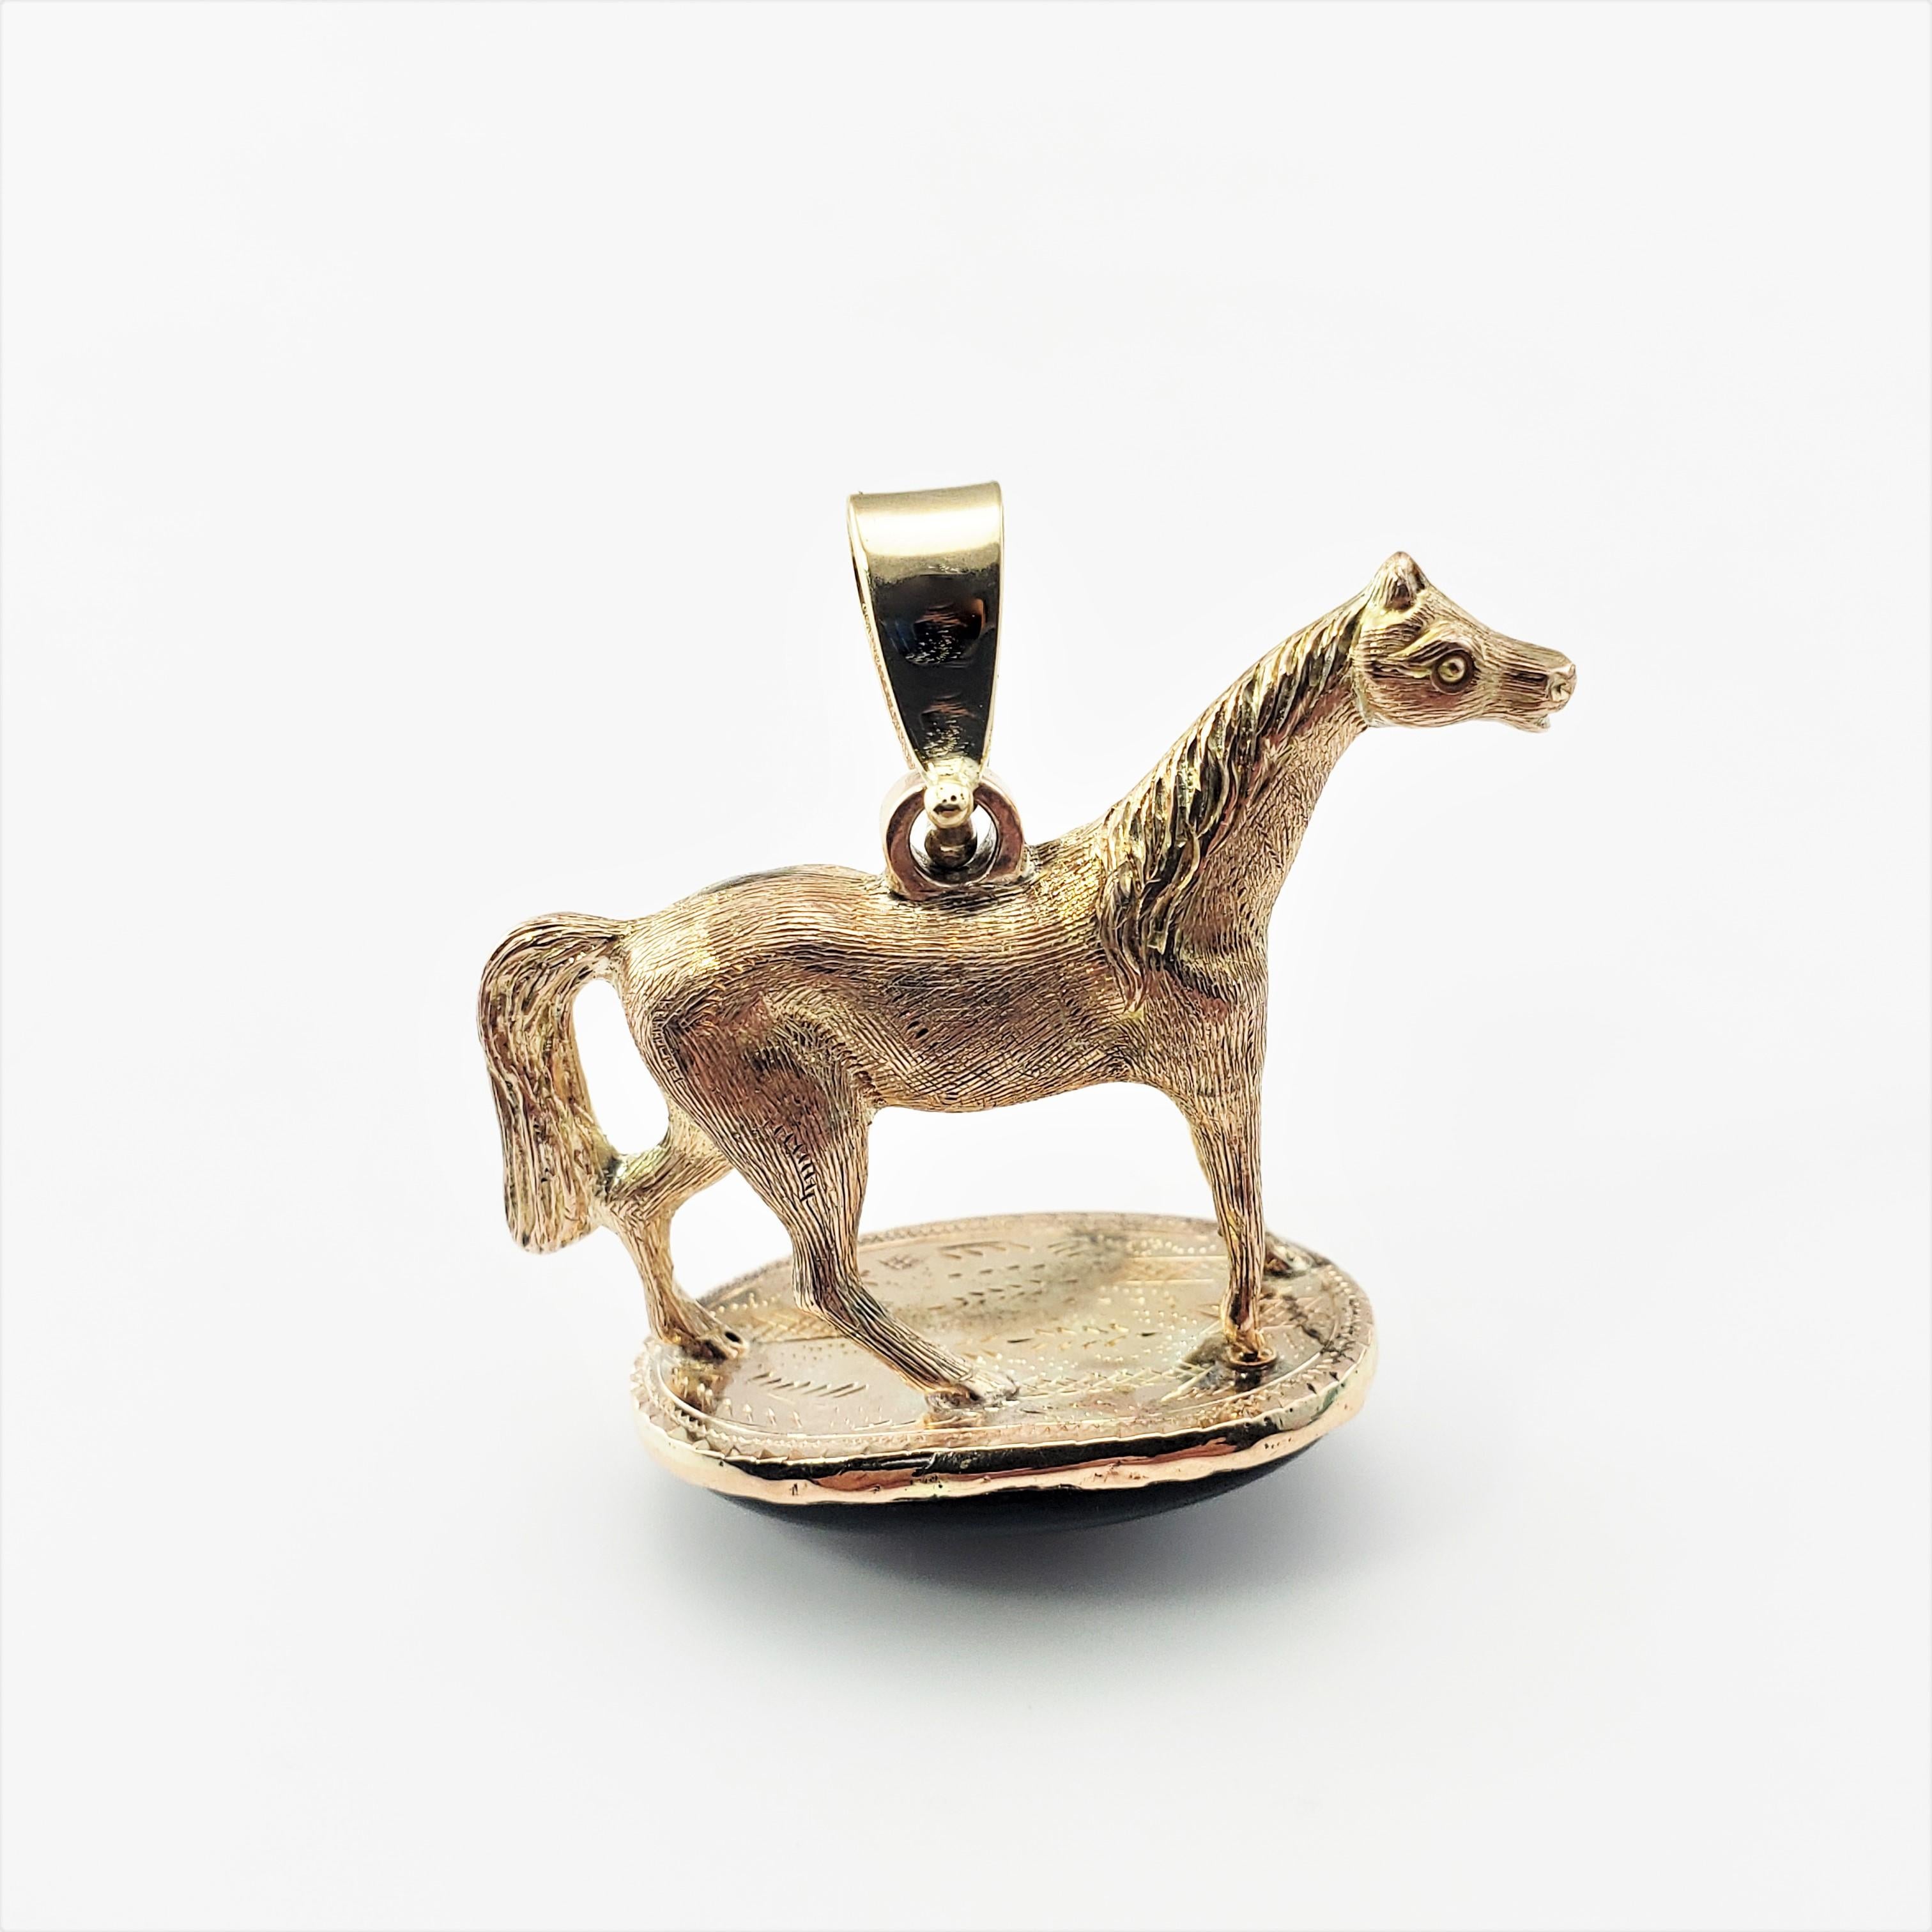 14 Karat Yellow Gold and Onyx Horse Pendant-

This stunning 14K yellow gold pendant features a beautiful horse sitting atop an oval black onyx gemstone (24 mm x 14 mm). 

*Chain not included.

Size:   29 mm  x  24  mm

Weight:  7.8 dwt. /  12.2